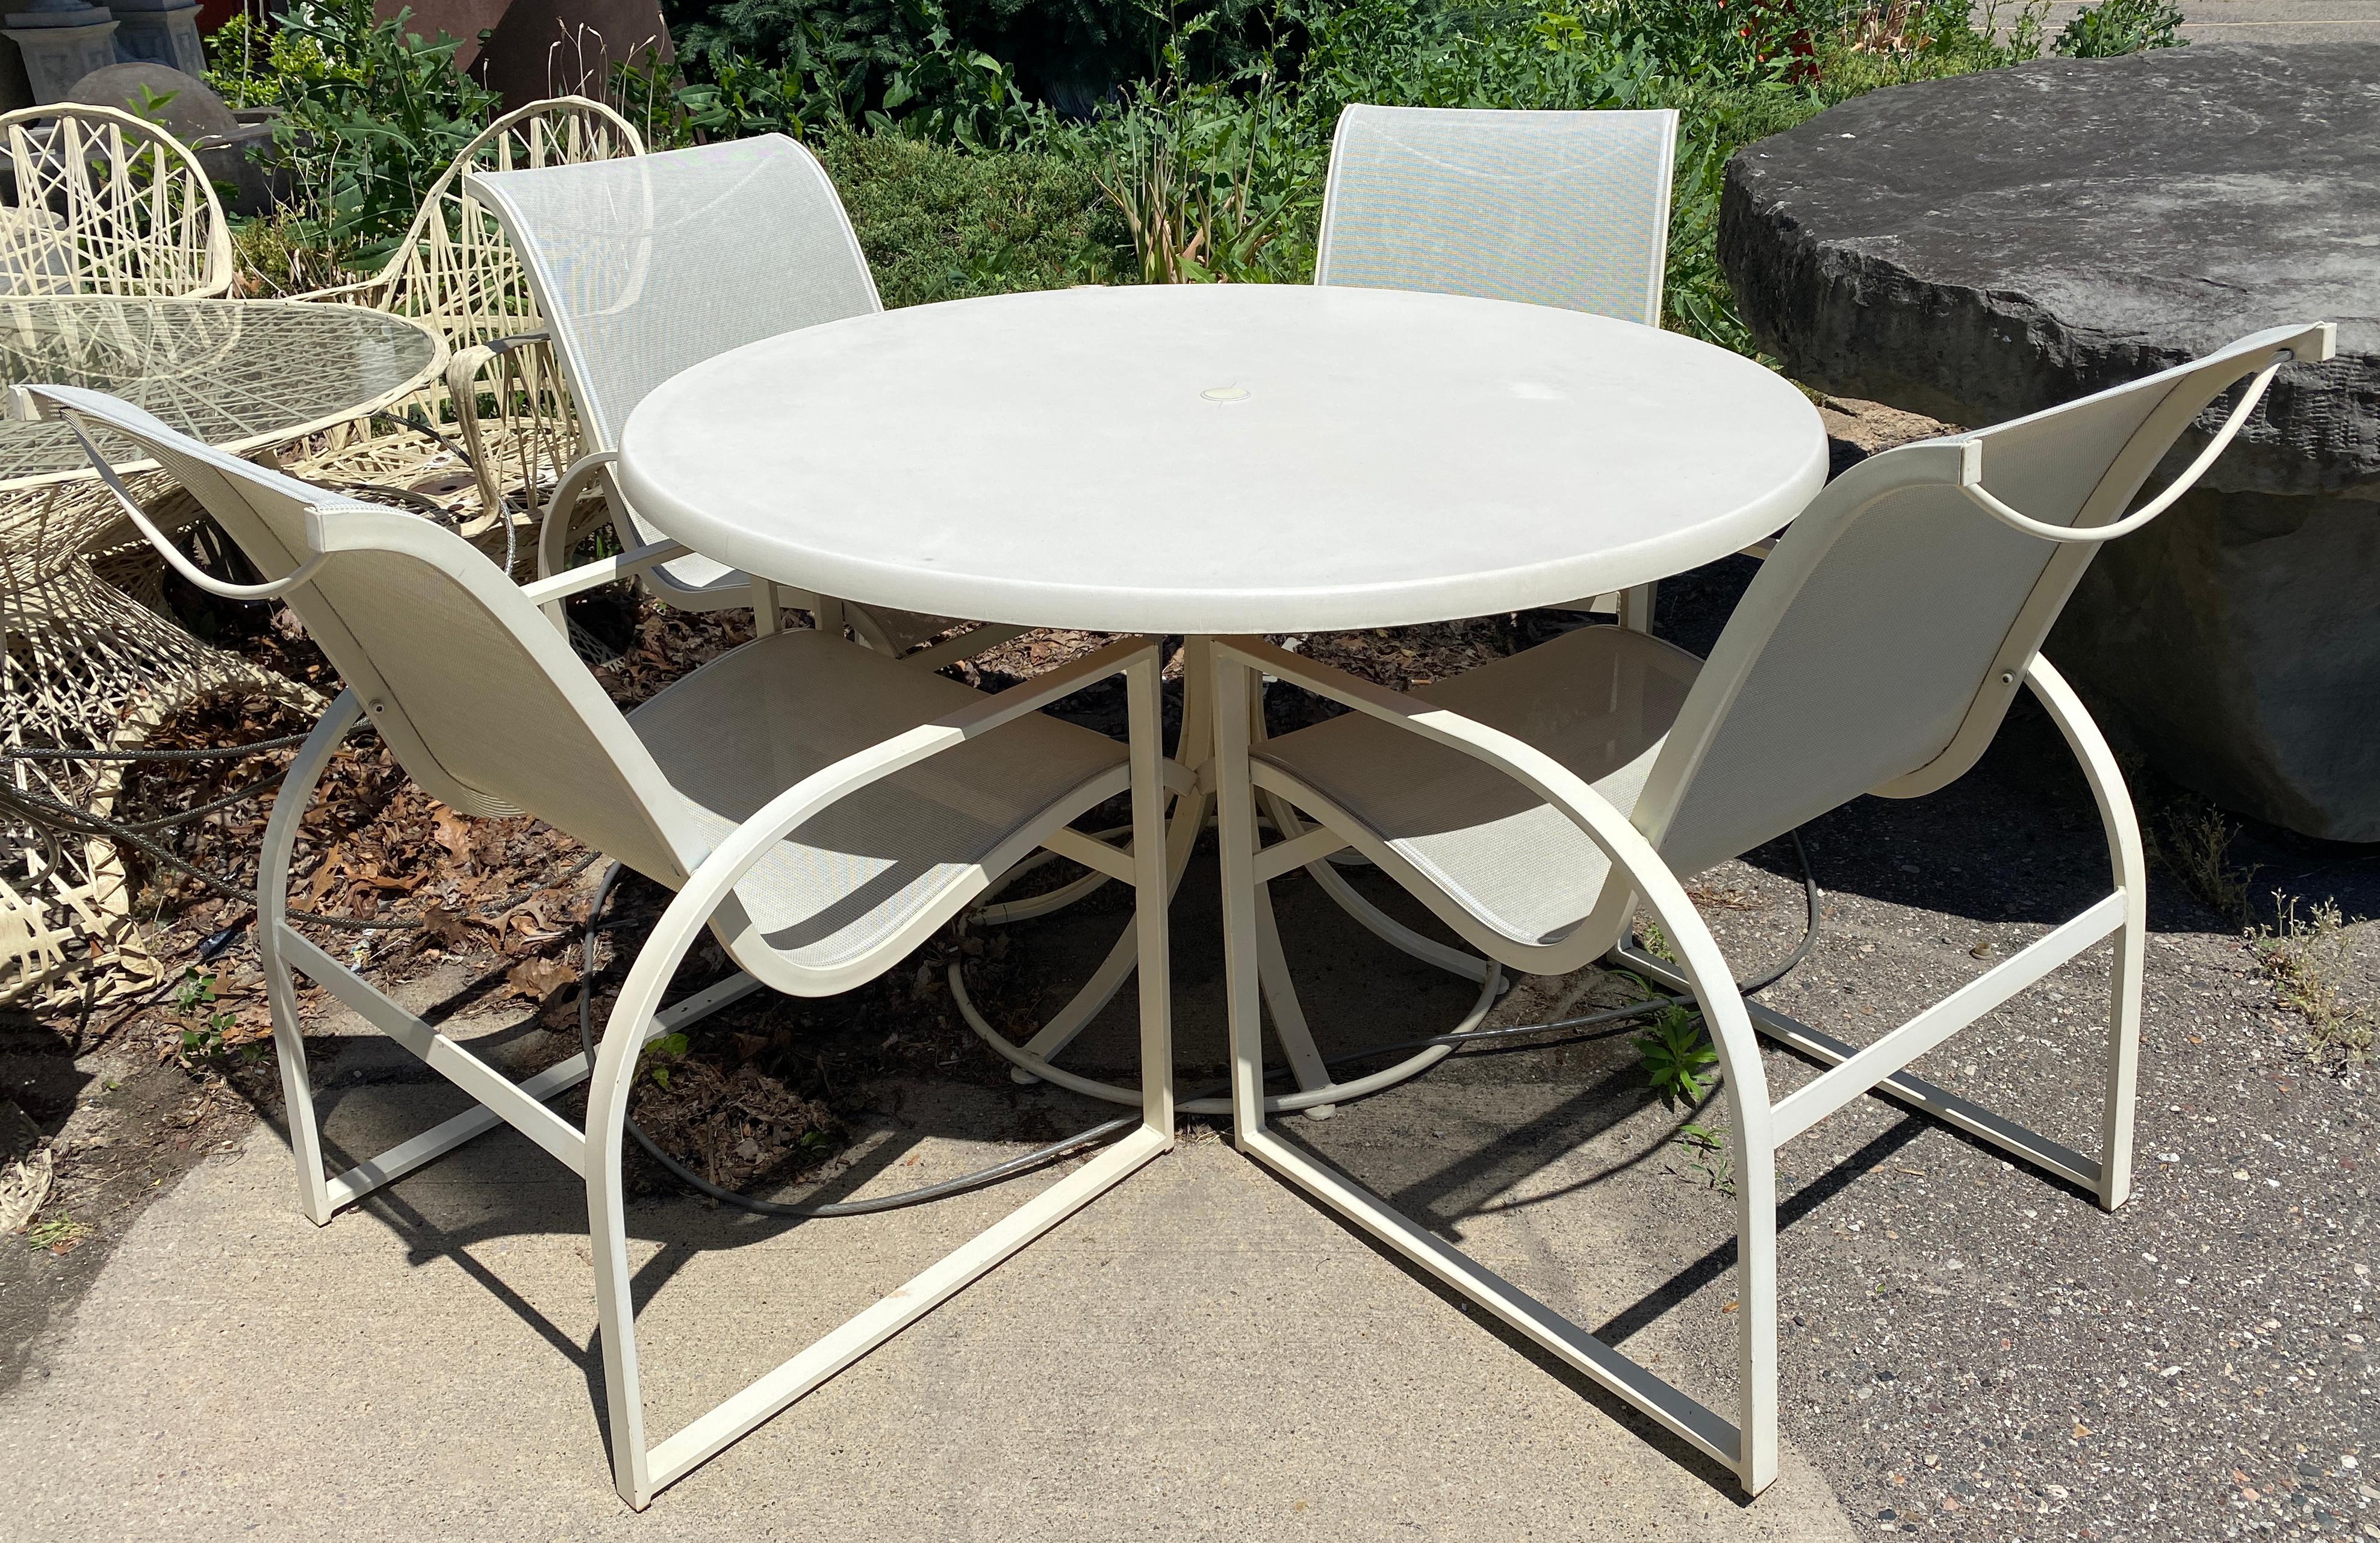 Mid-Century Modern Woodard Margarita Patio Dining Set Table 4 Curved Chairs 3